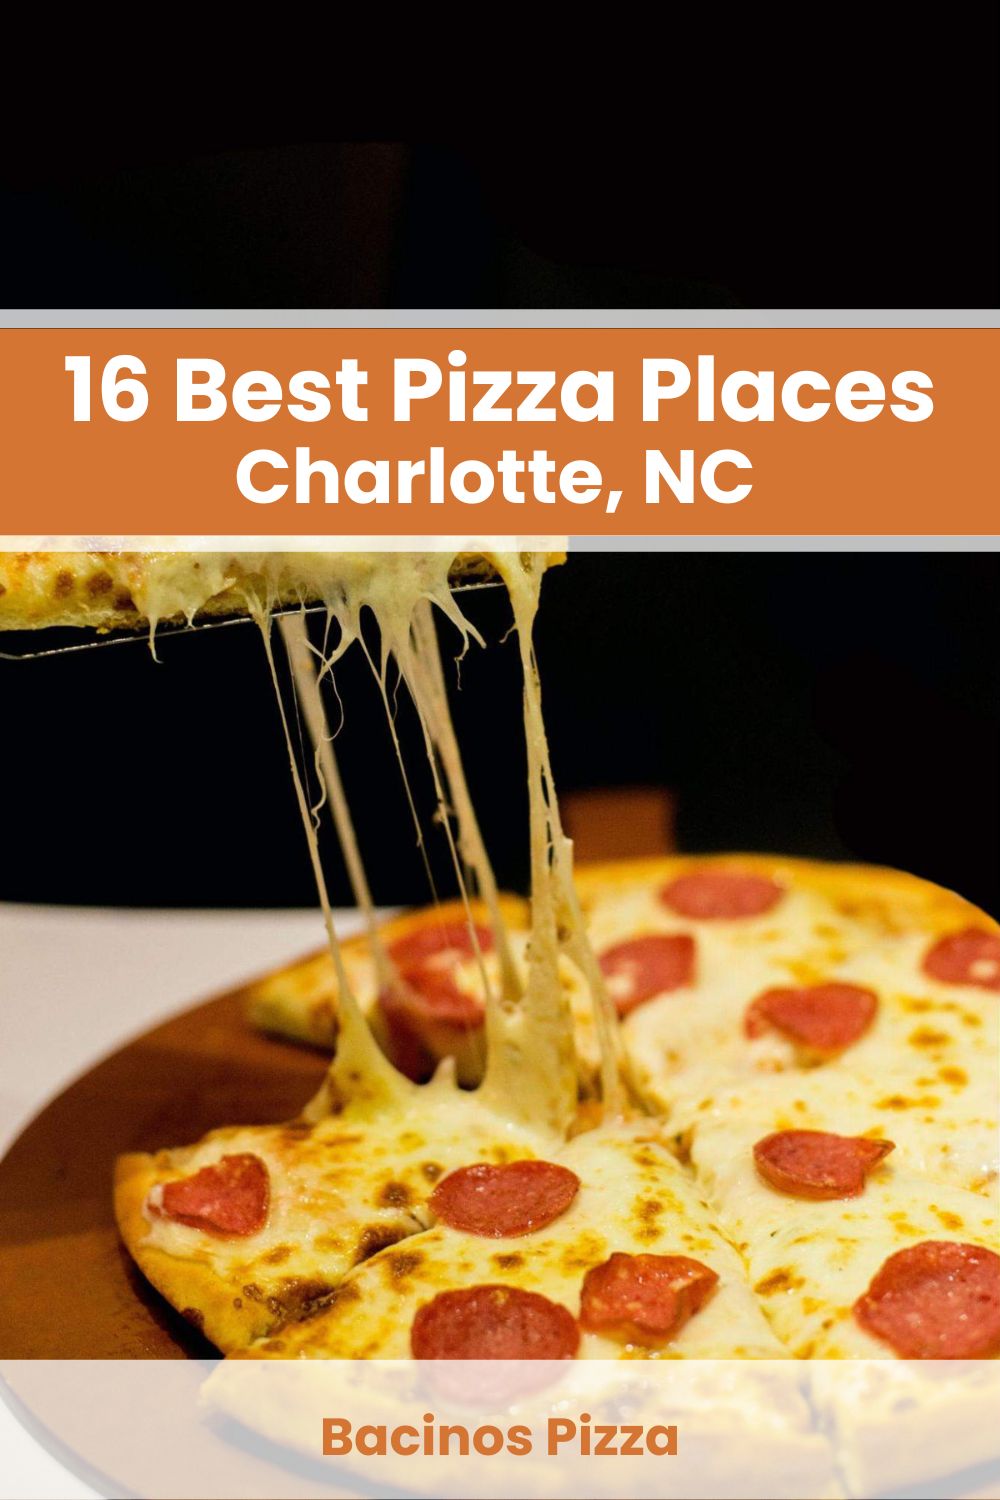 Best Pizza Places in Charlotte